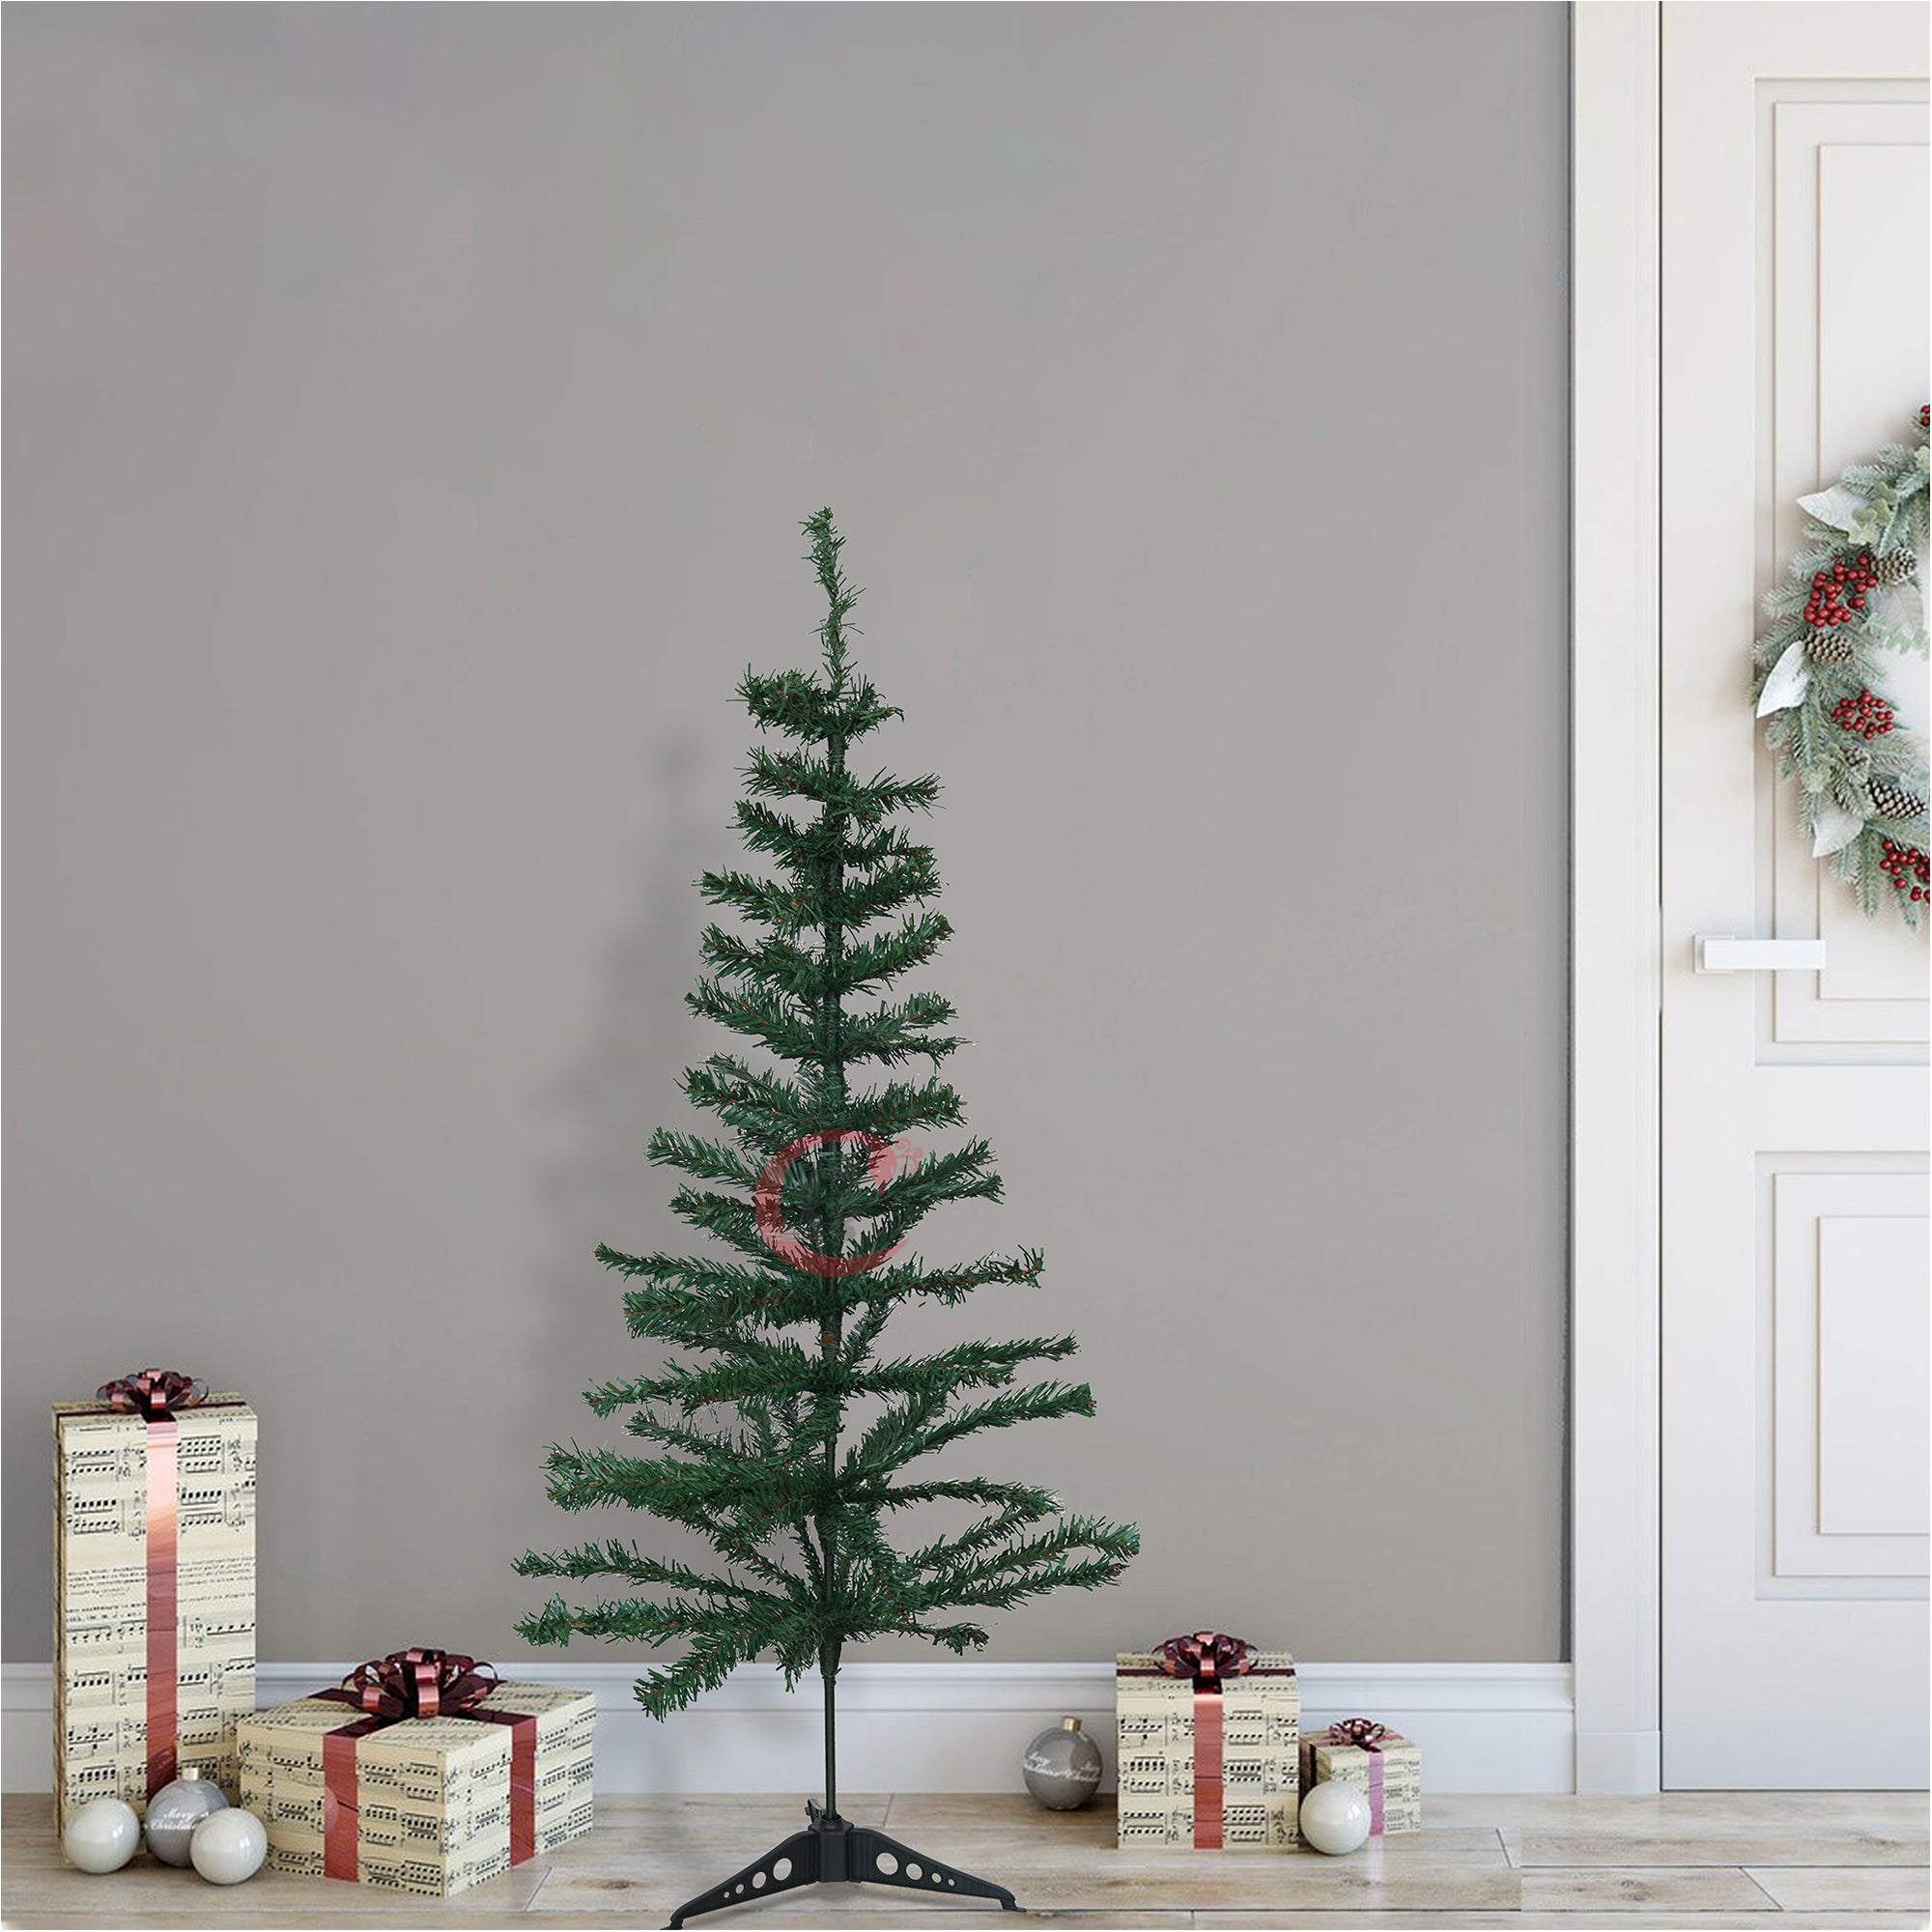 eCraftIndia 4 Feet Green Artificial Christmas Tree Xmas Pine Tree with Stand and 60 Christmas Decoration Ornaments Props - Merry Christmas Decoration Item for Home, Office, and Church 4